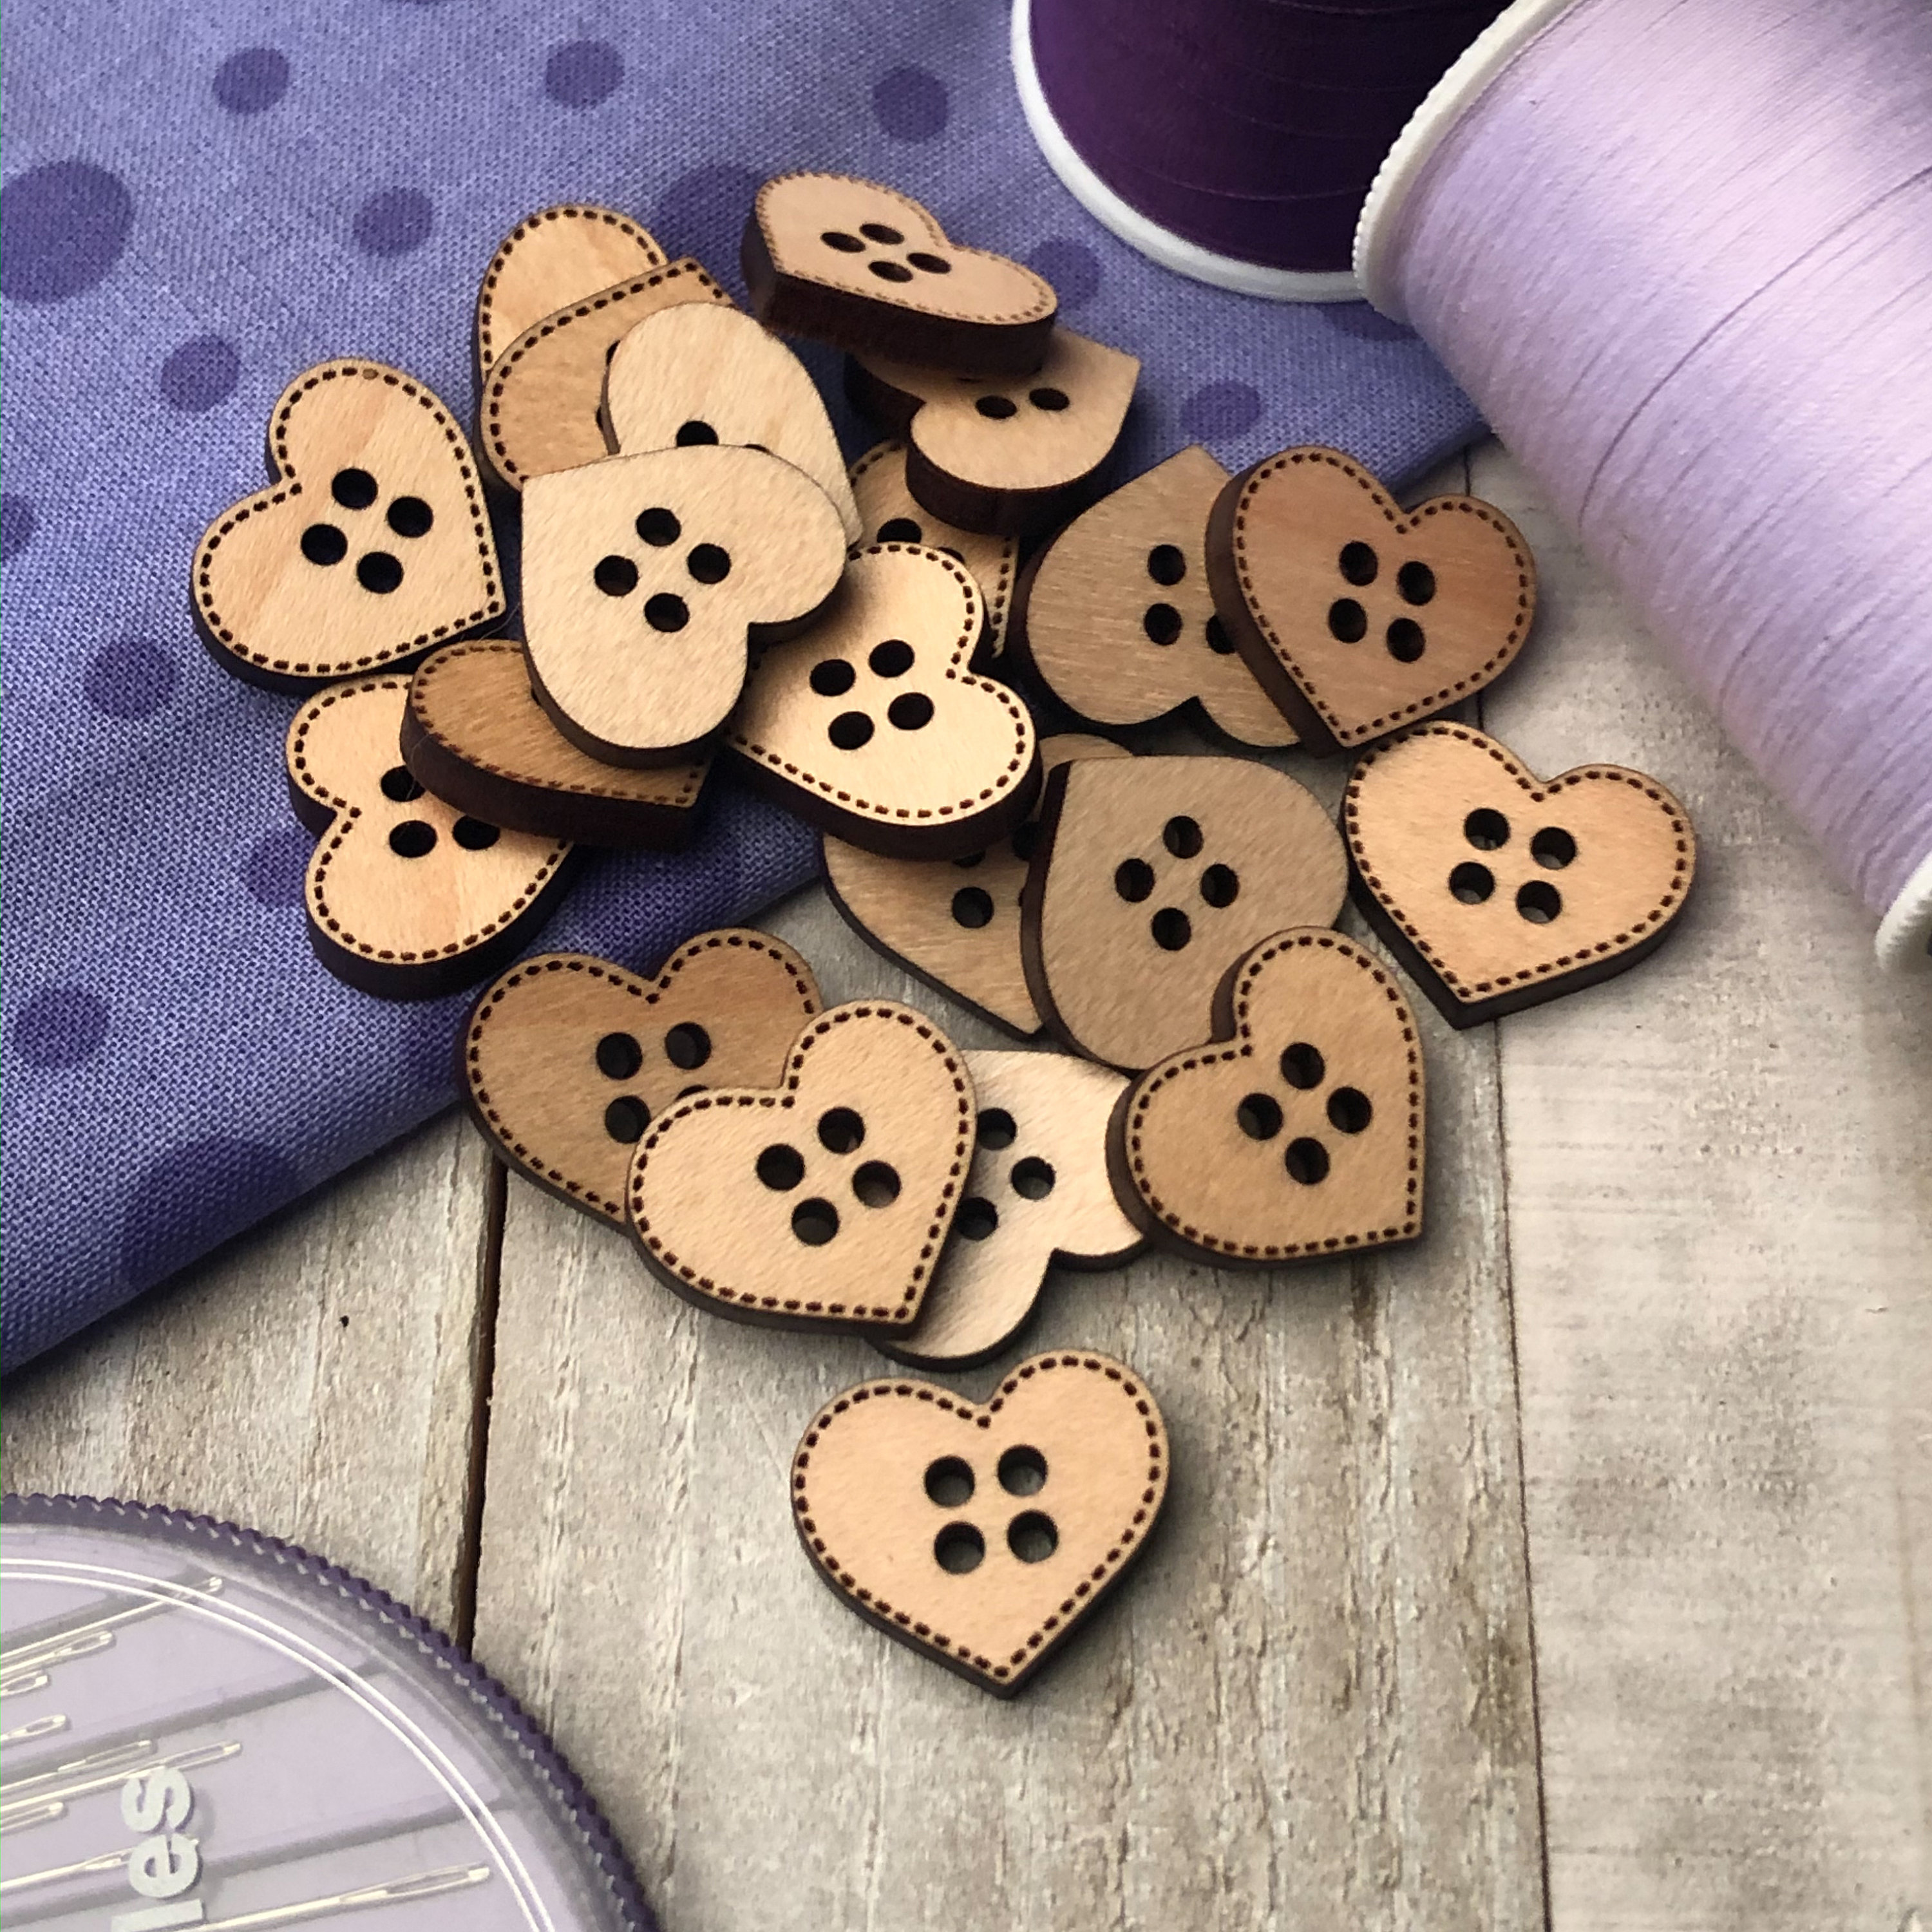 Heart Shaped Buttons - 100 Pcs 1618mm Wooden Colorful 2 Holes Mixed Decorative Buttons for DIY Sewing & Wood Crafts OUSBA Vintage Flower Painting